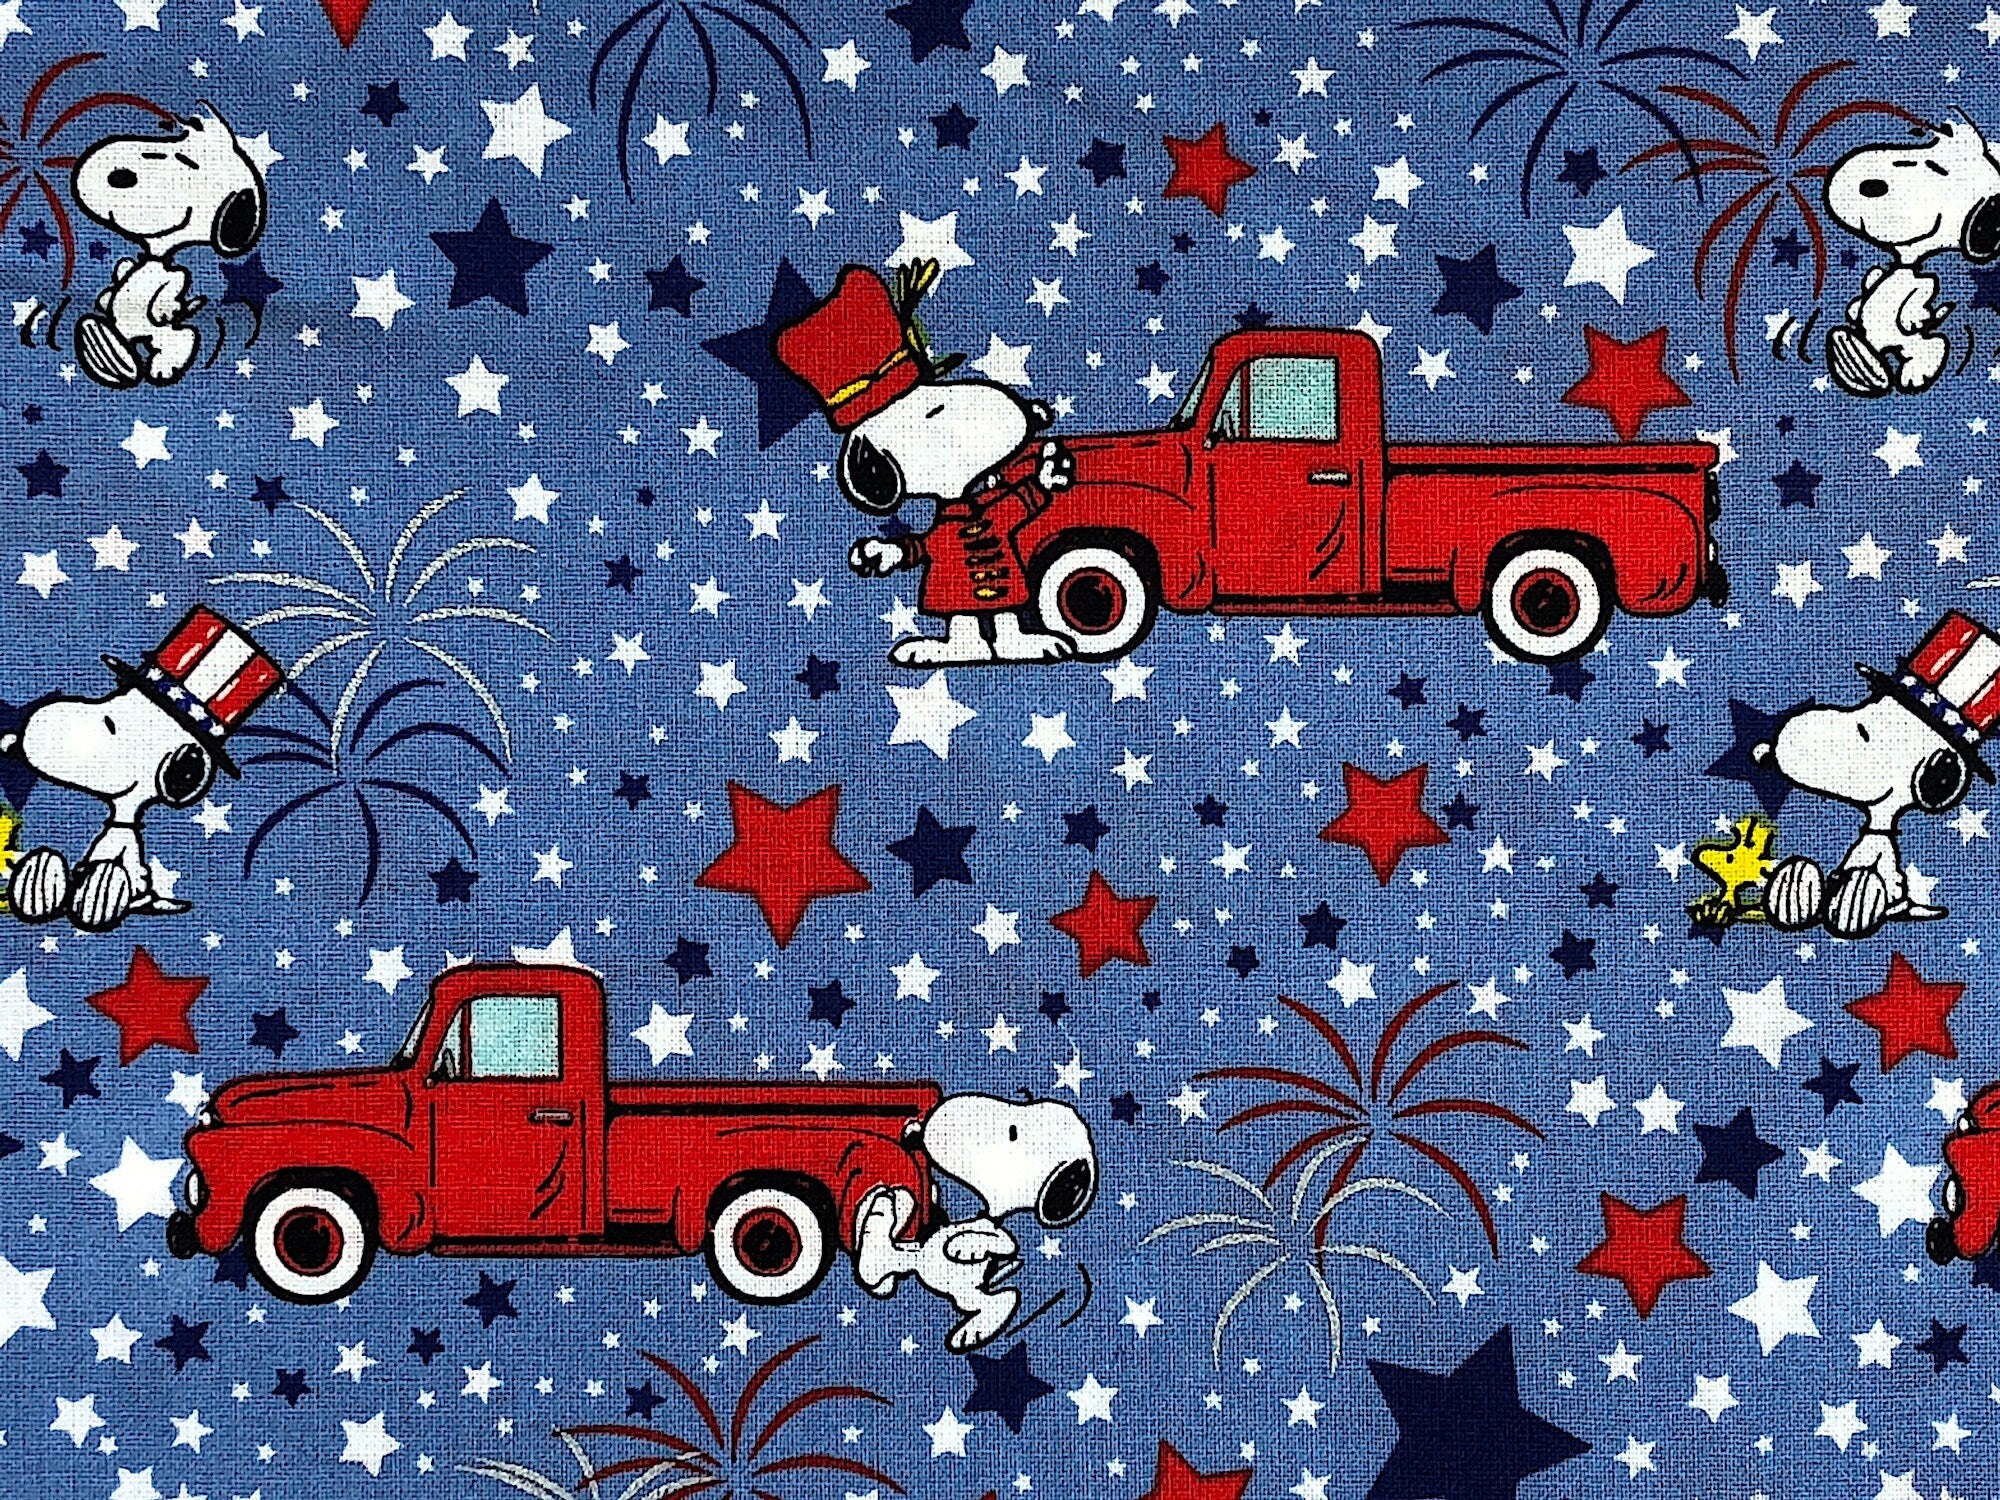 Close up of Snoopy celebrating Independence Day